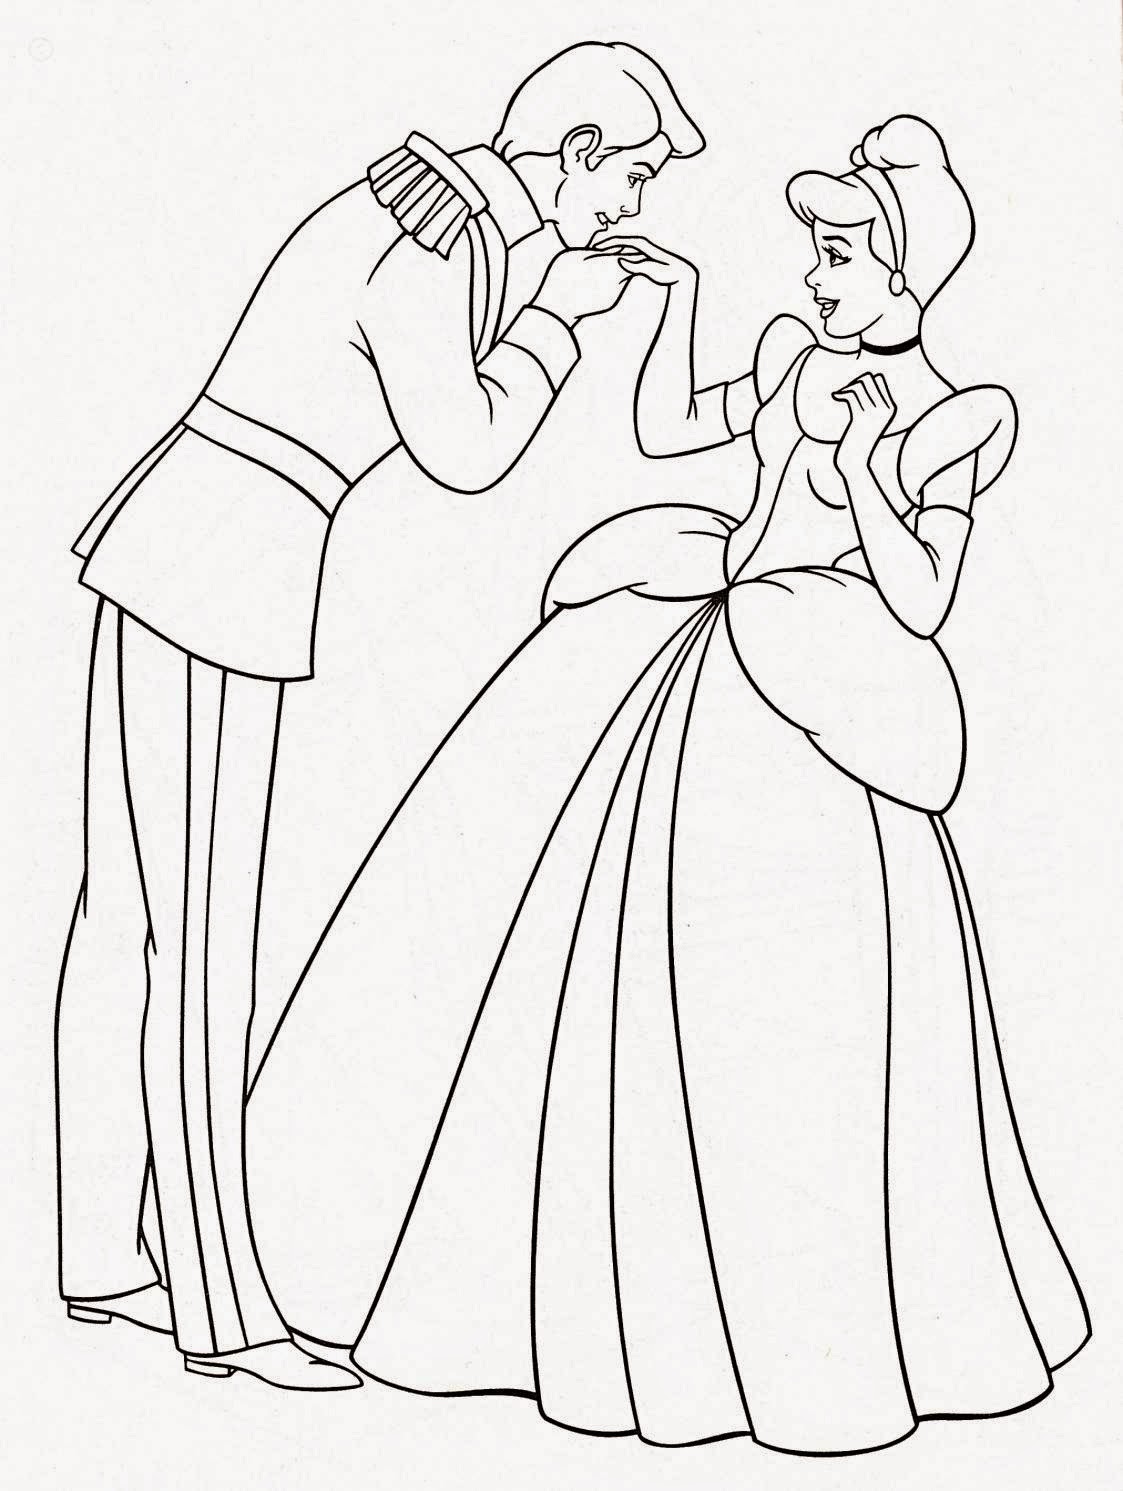 Download Coloring Pages: Disney Coloring Pages Free and Printable